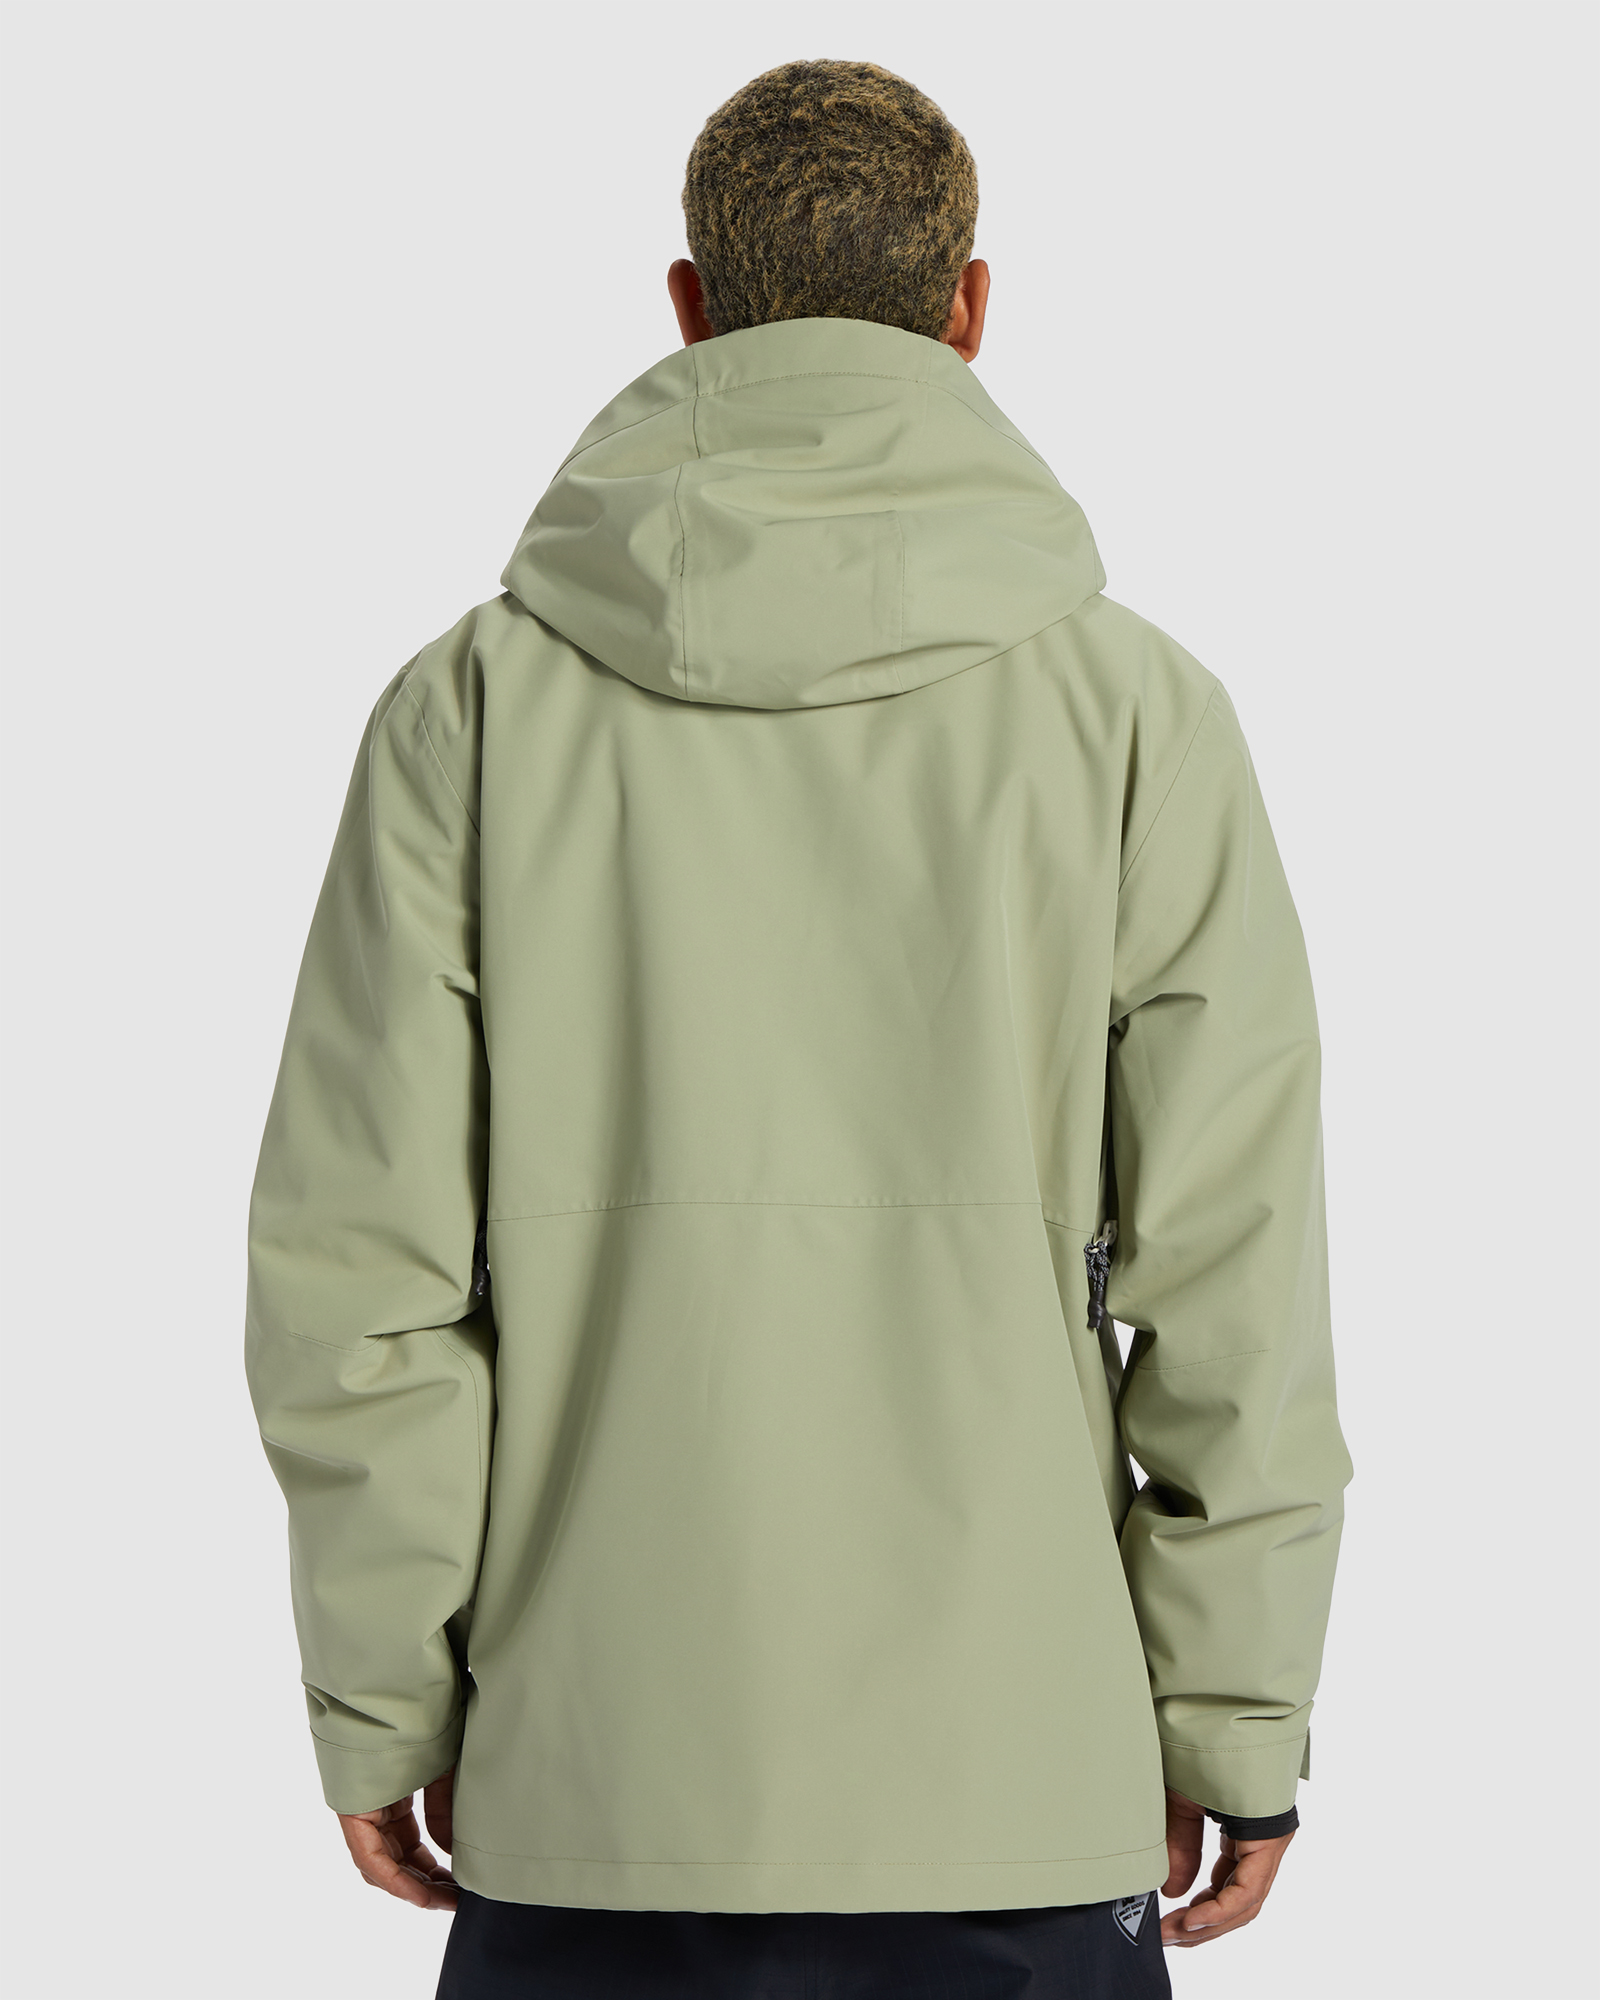 Dc Shoes Basis 30K - Technical Snow Jacket For Men - Oil Green | SurfStitch